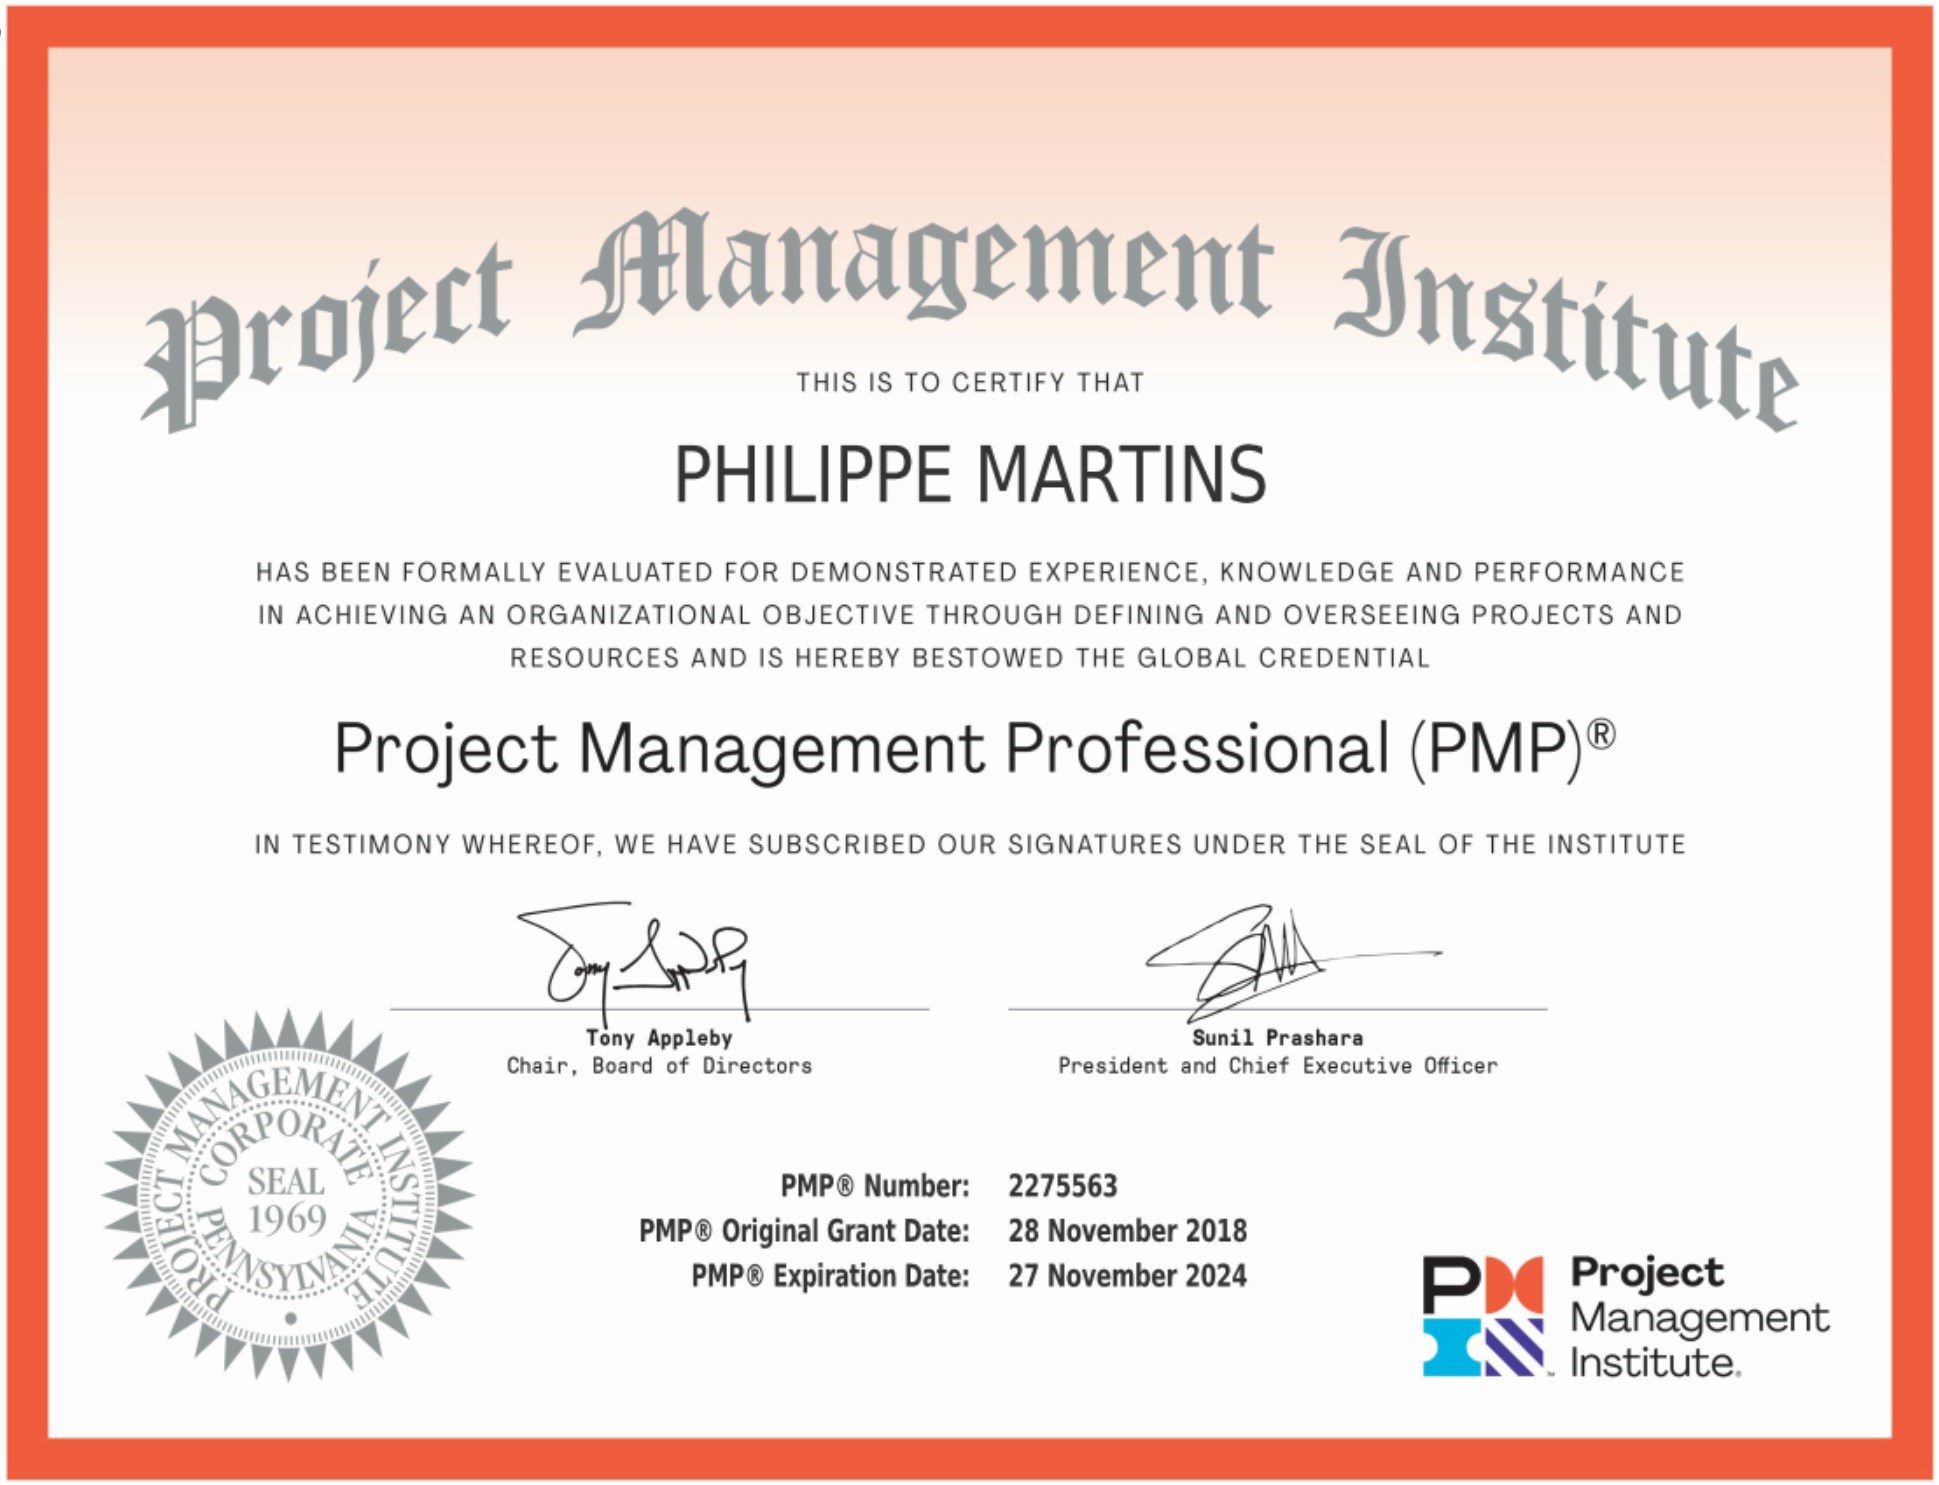 Philippe MARTINS, Project Manager certified (PMP)®